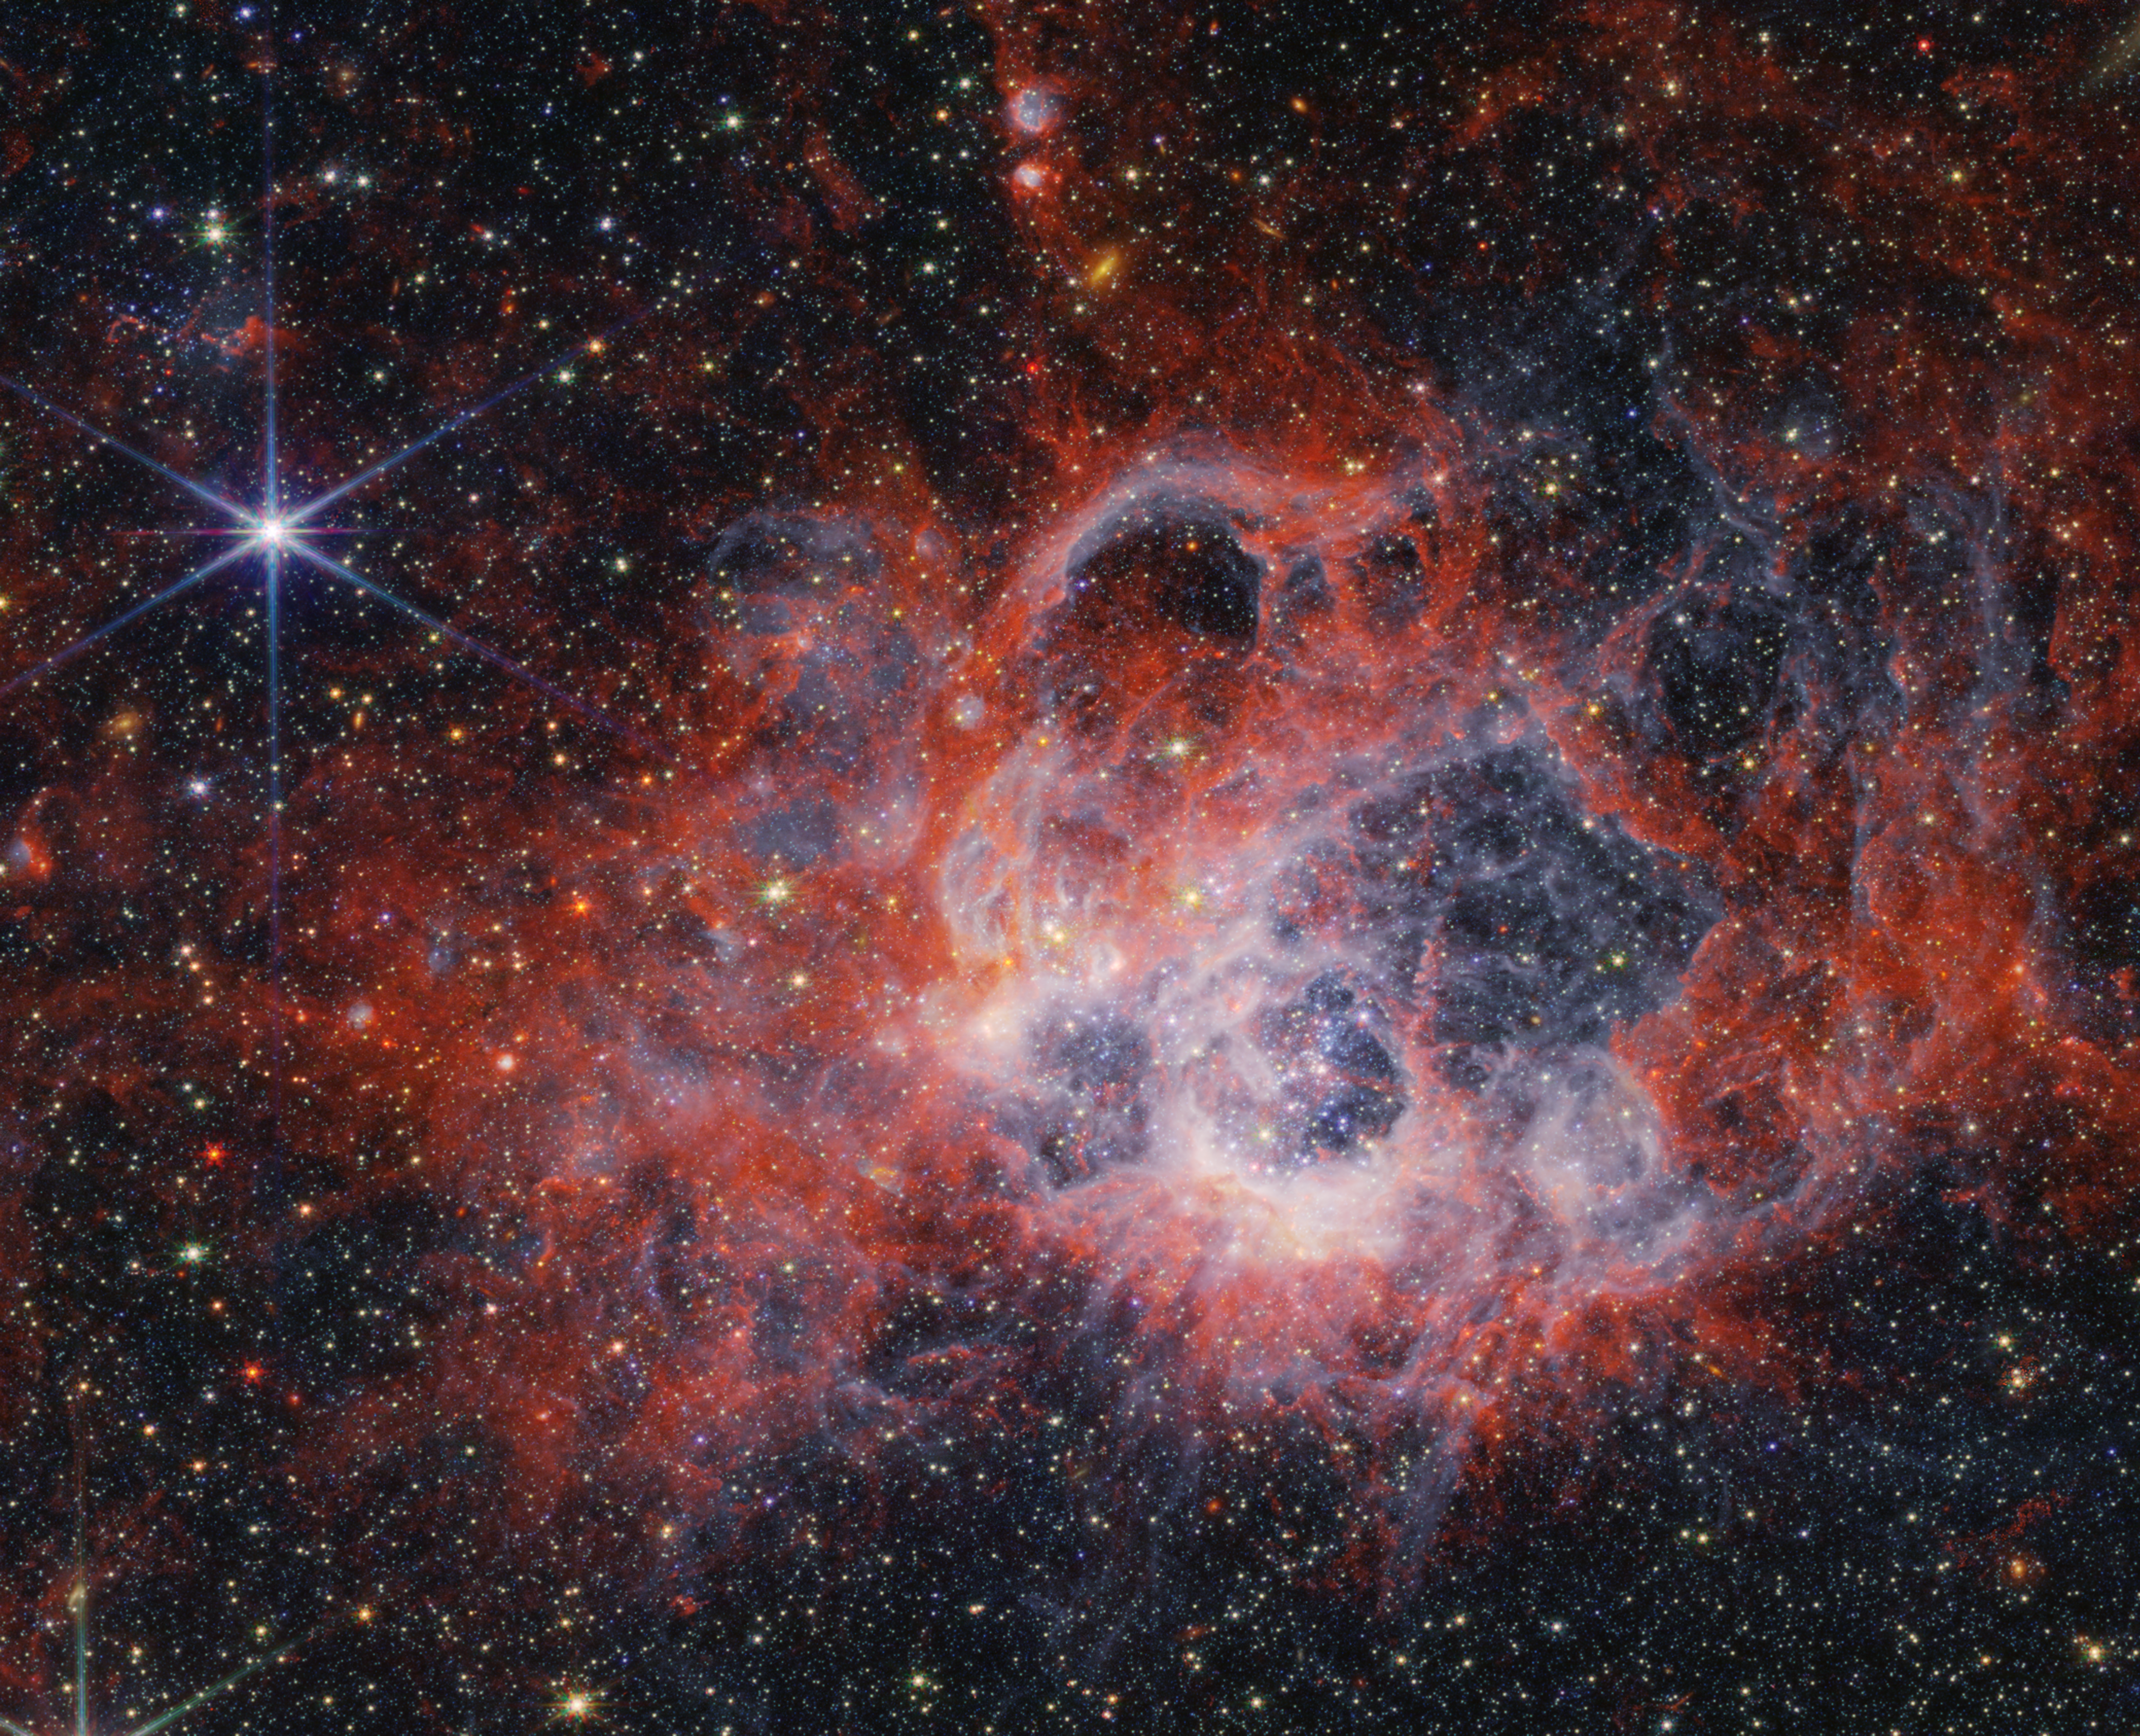 At the center of the image is a nebula on the black background of space. The nebula is comprised of clumpy, red, filamentary clouds. At the center-right of the red clouds is a large cavernous bubble, and at the center of the bubble there is an opaque blueish glow with speckles of stars. At the edges of the bubble, the dust is white. There are several other smaller cavernous bubbles at the top of the nebula, including two tiny cavities at the top center of the image. There are thousands of stars that fill the surrounding area outside the nebula, most of them are yellow or white. At 11 o’clock and 6 o’clock there are extremely bright stars with 8 diffraction spikes. There are also some smaller, red stars and a few disk-shaped galaxies scattered across the image.